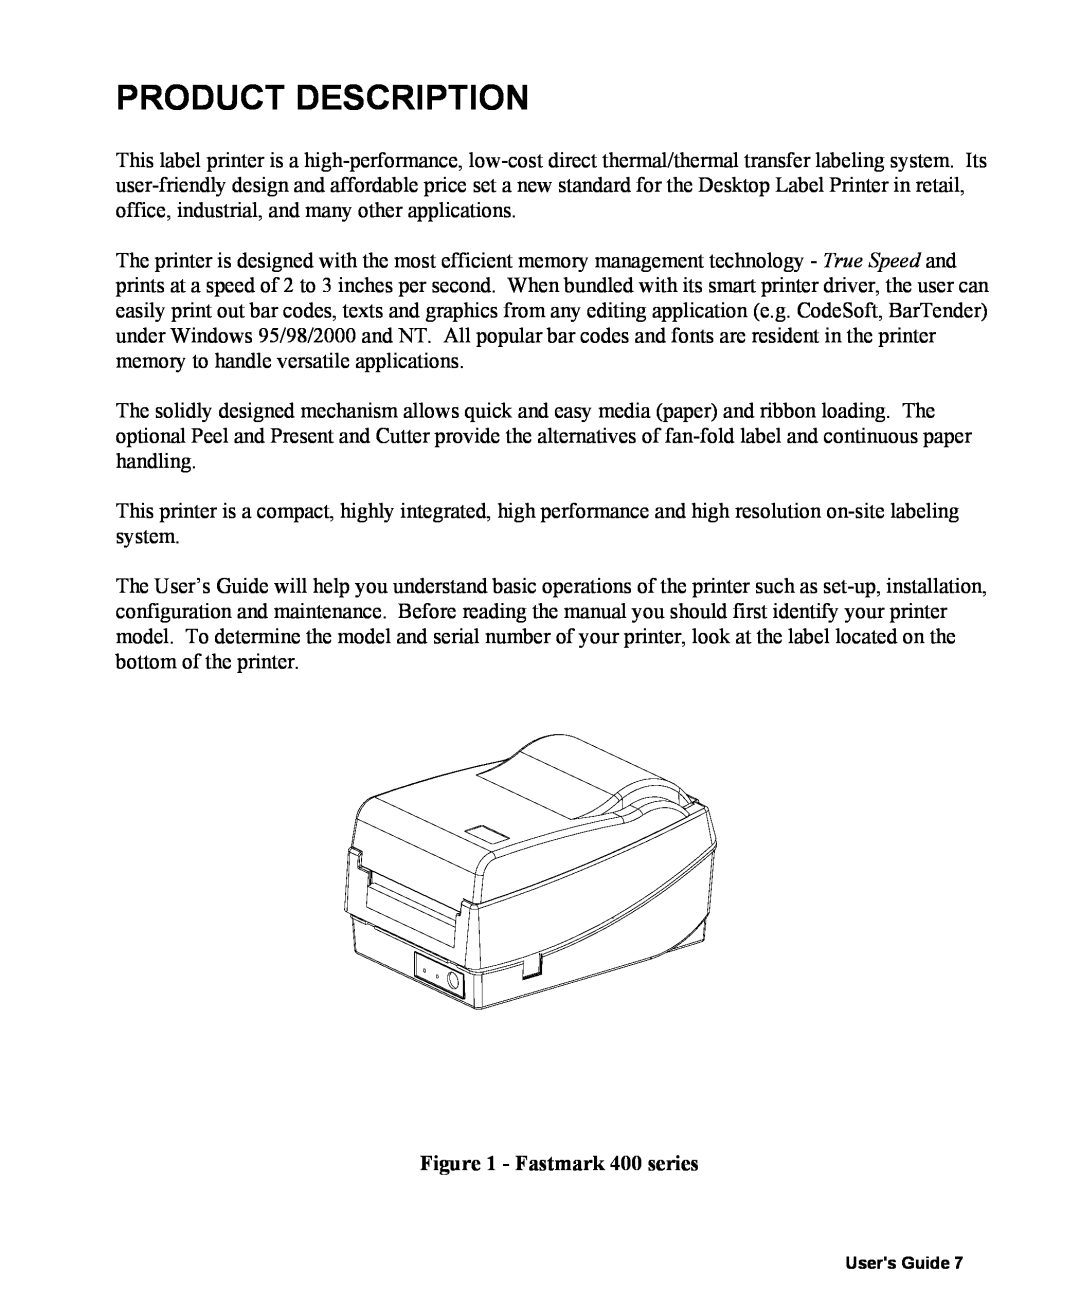 AMT Datasouth manual Product Description, Fastmark 400 series 